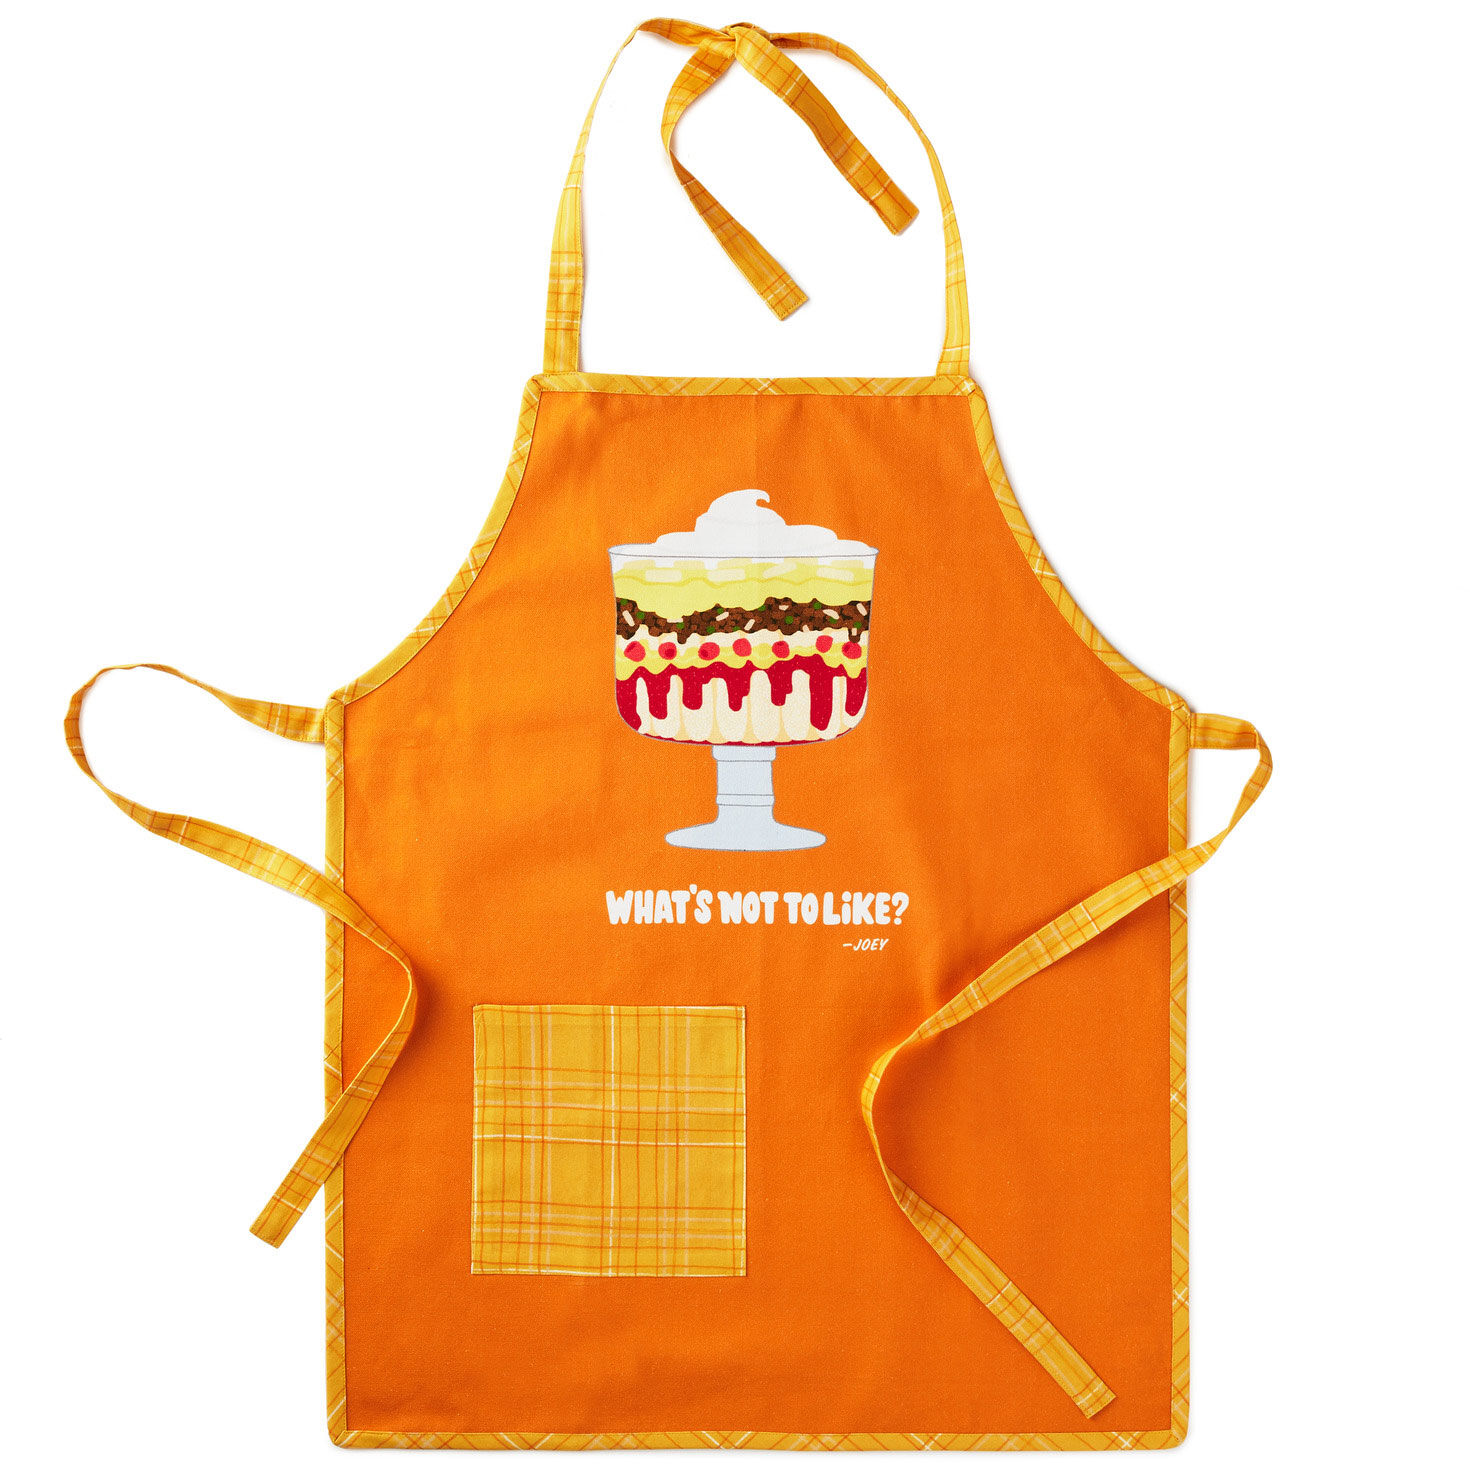 https://www.hallmark.com/dw/image/v2/AALB_PRD/on/demandware.static/-/Sites-hallmark-master/default/dw9ed00fe5/images/finished-goods/products/1PCL1019/Friends-Rachels-Trifle-Bib-Apron-With-Joey-Quote_1PCL1019_01.jpg?sfrm=jpg